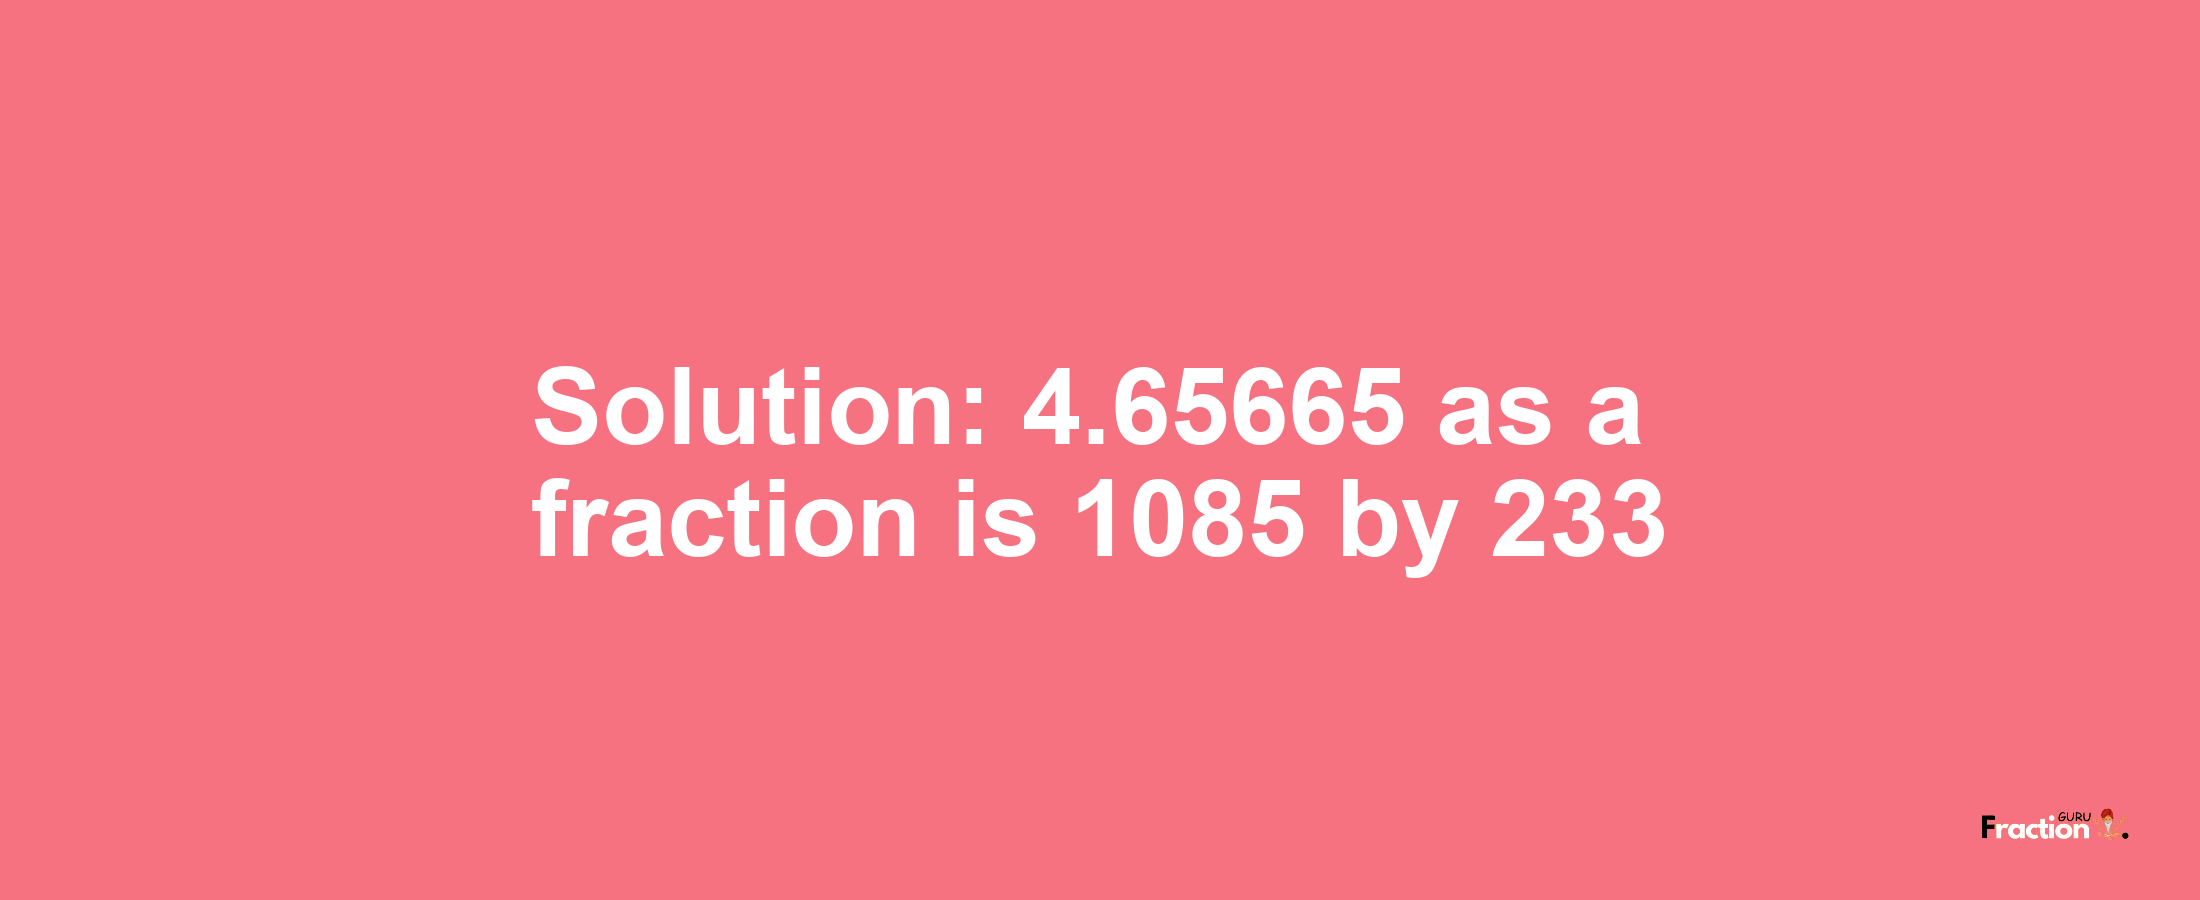 Solution:4.65665 as a fraction is 1085/233